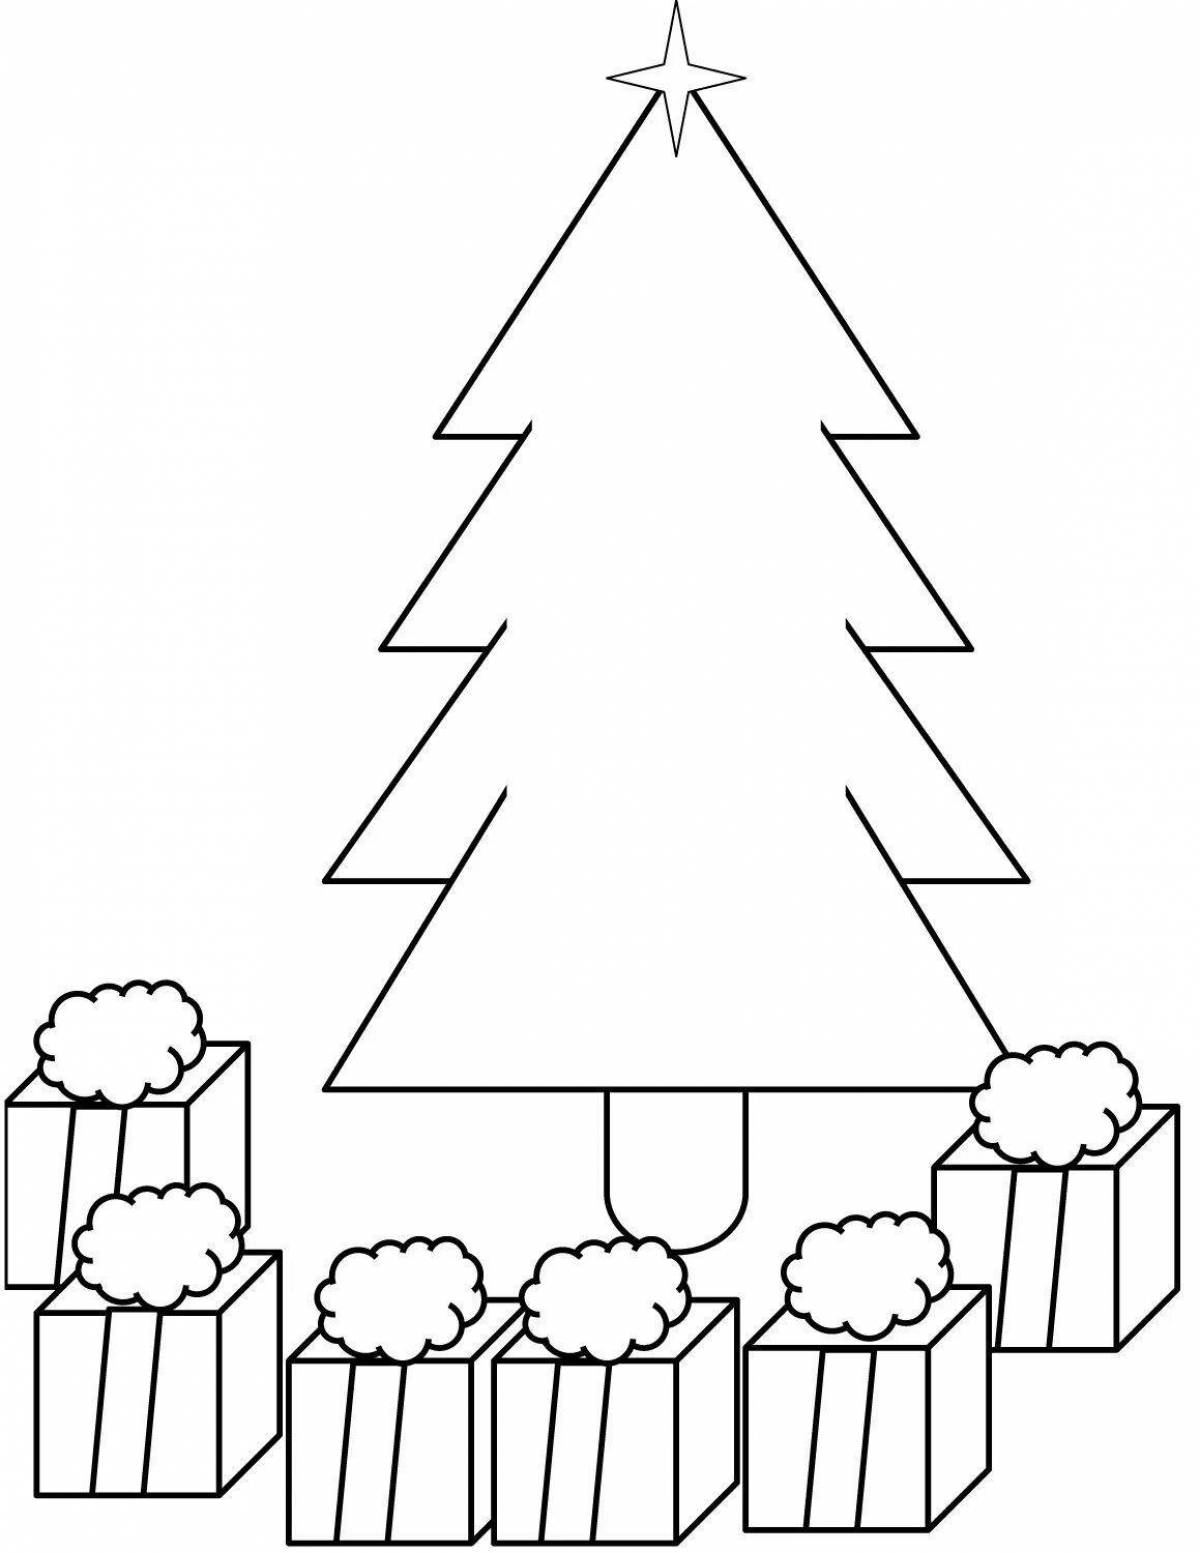 Blessed tree coloring page